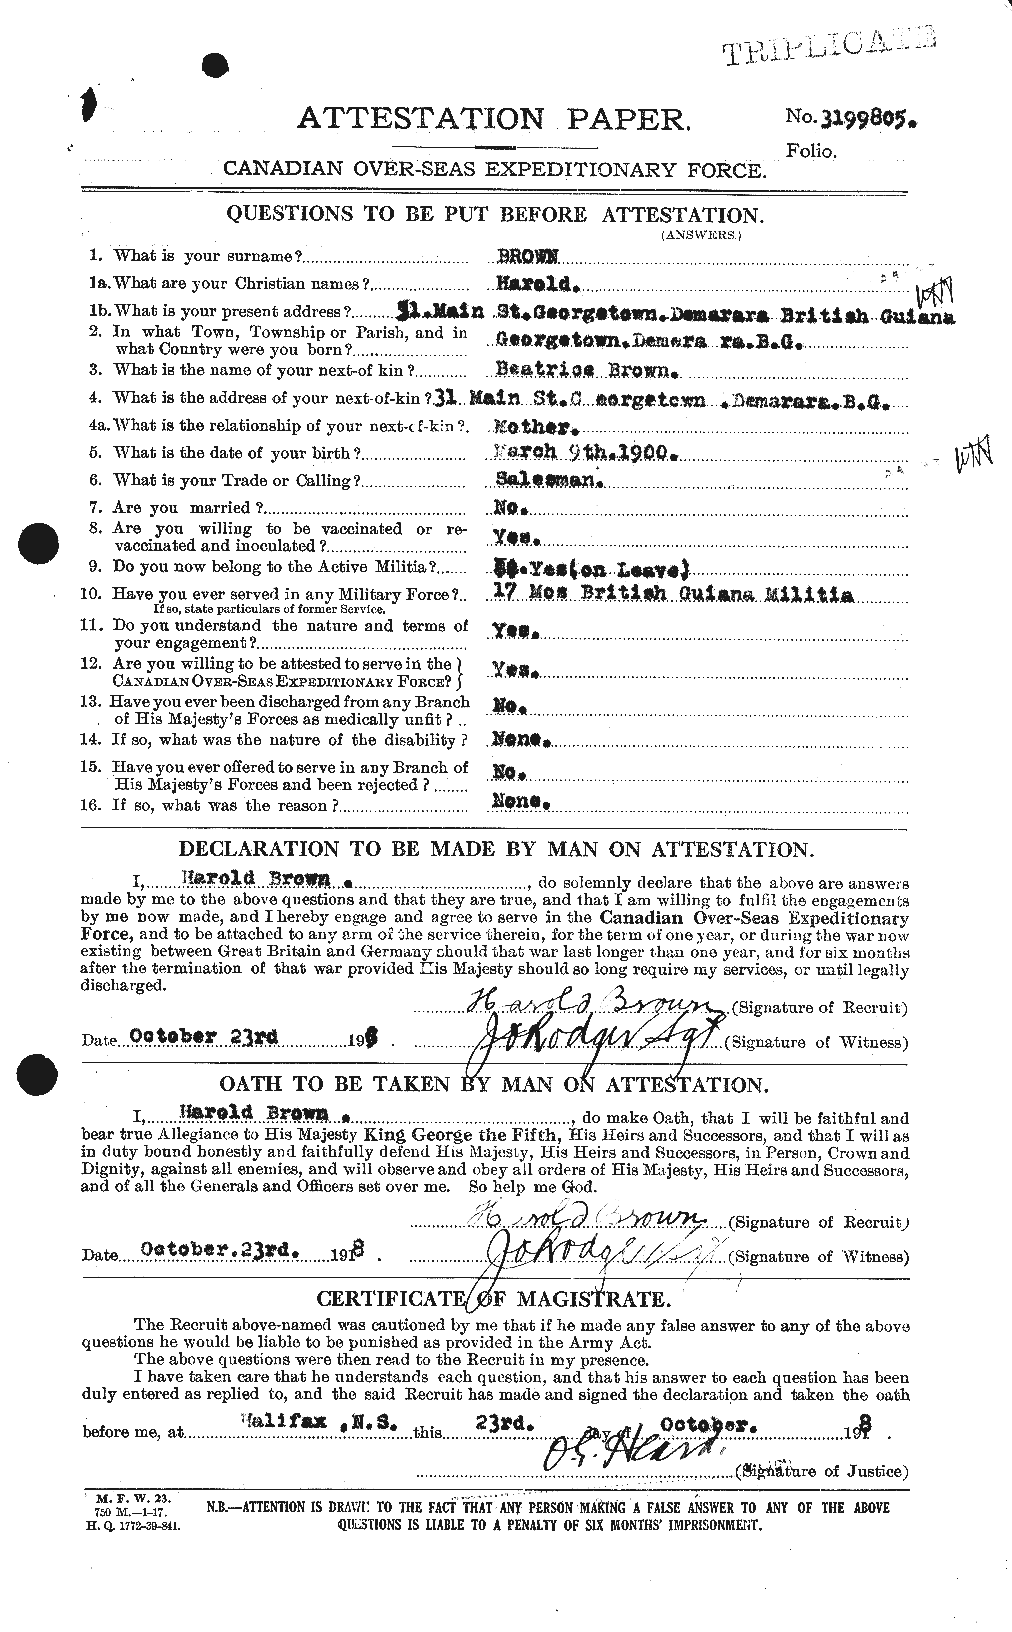 Personnel Records of the First World War - CEF 265339a